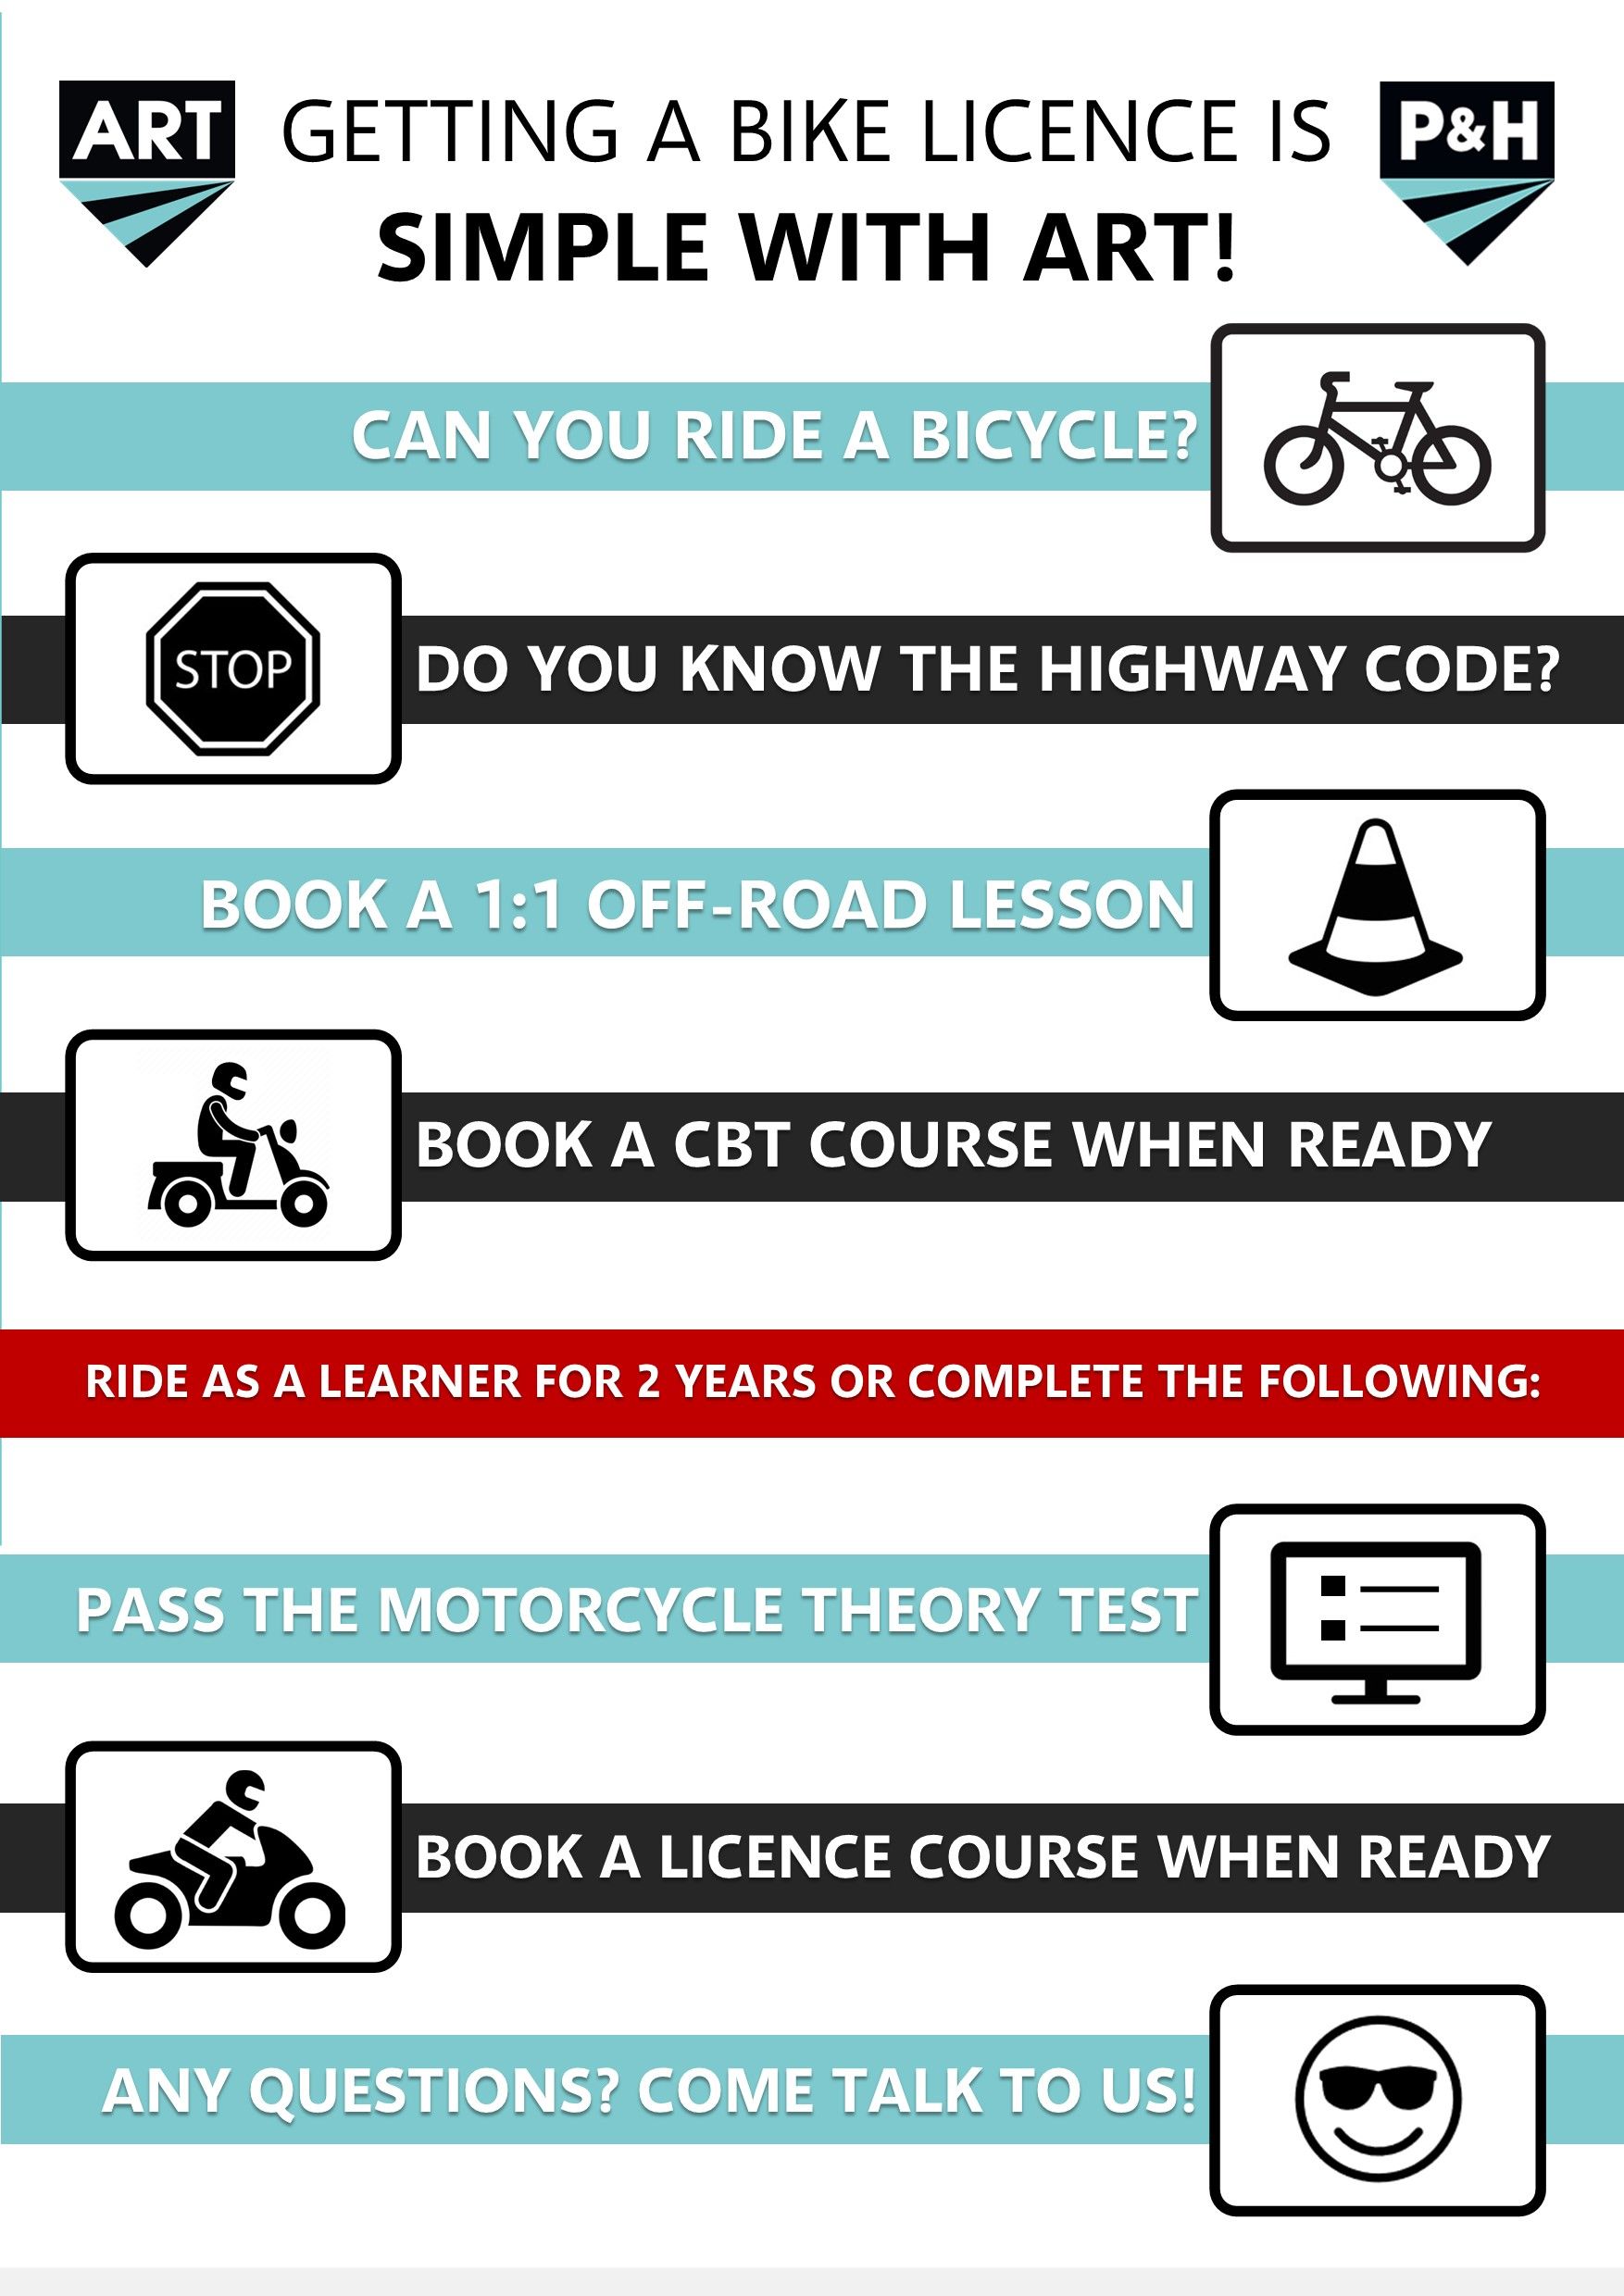 Learn to ride a motorcycle